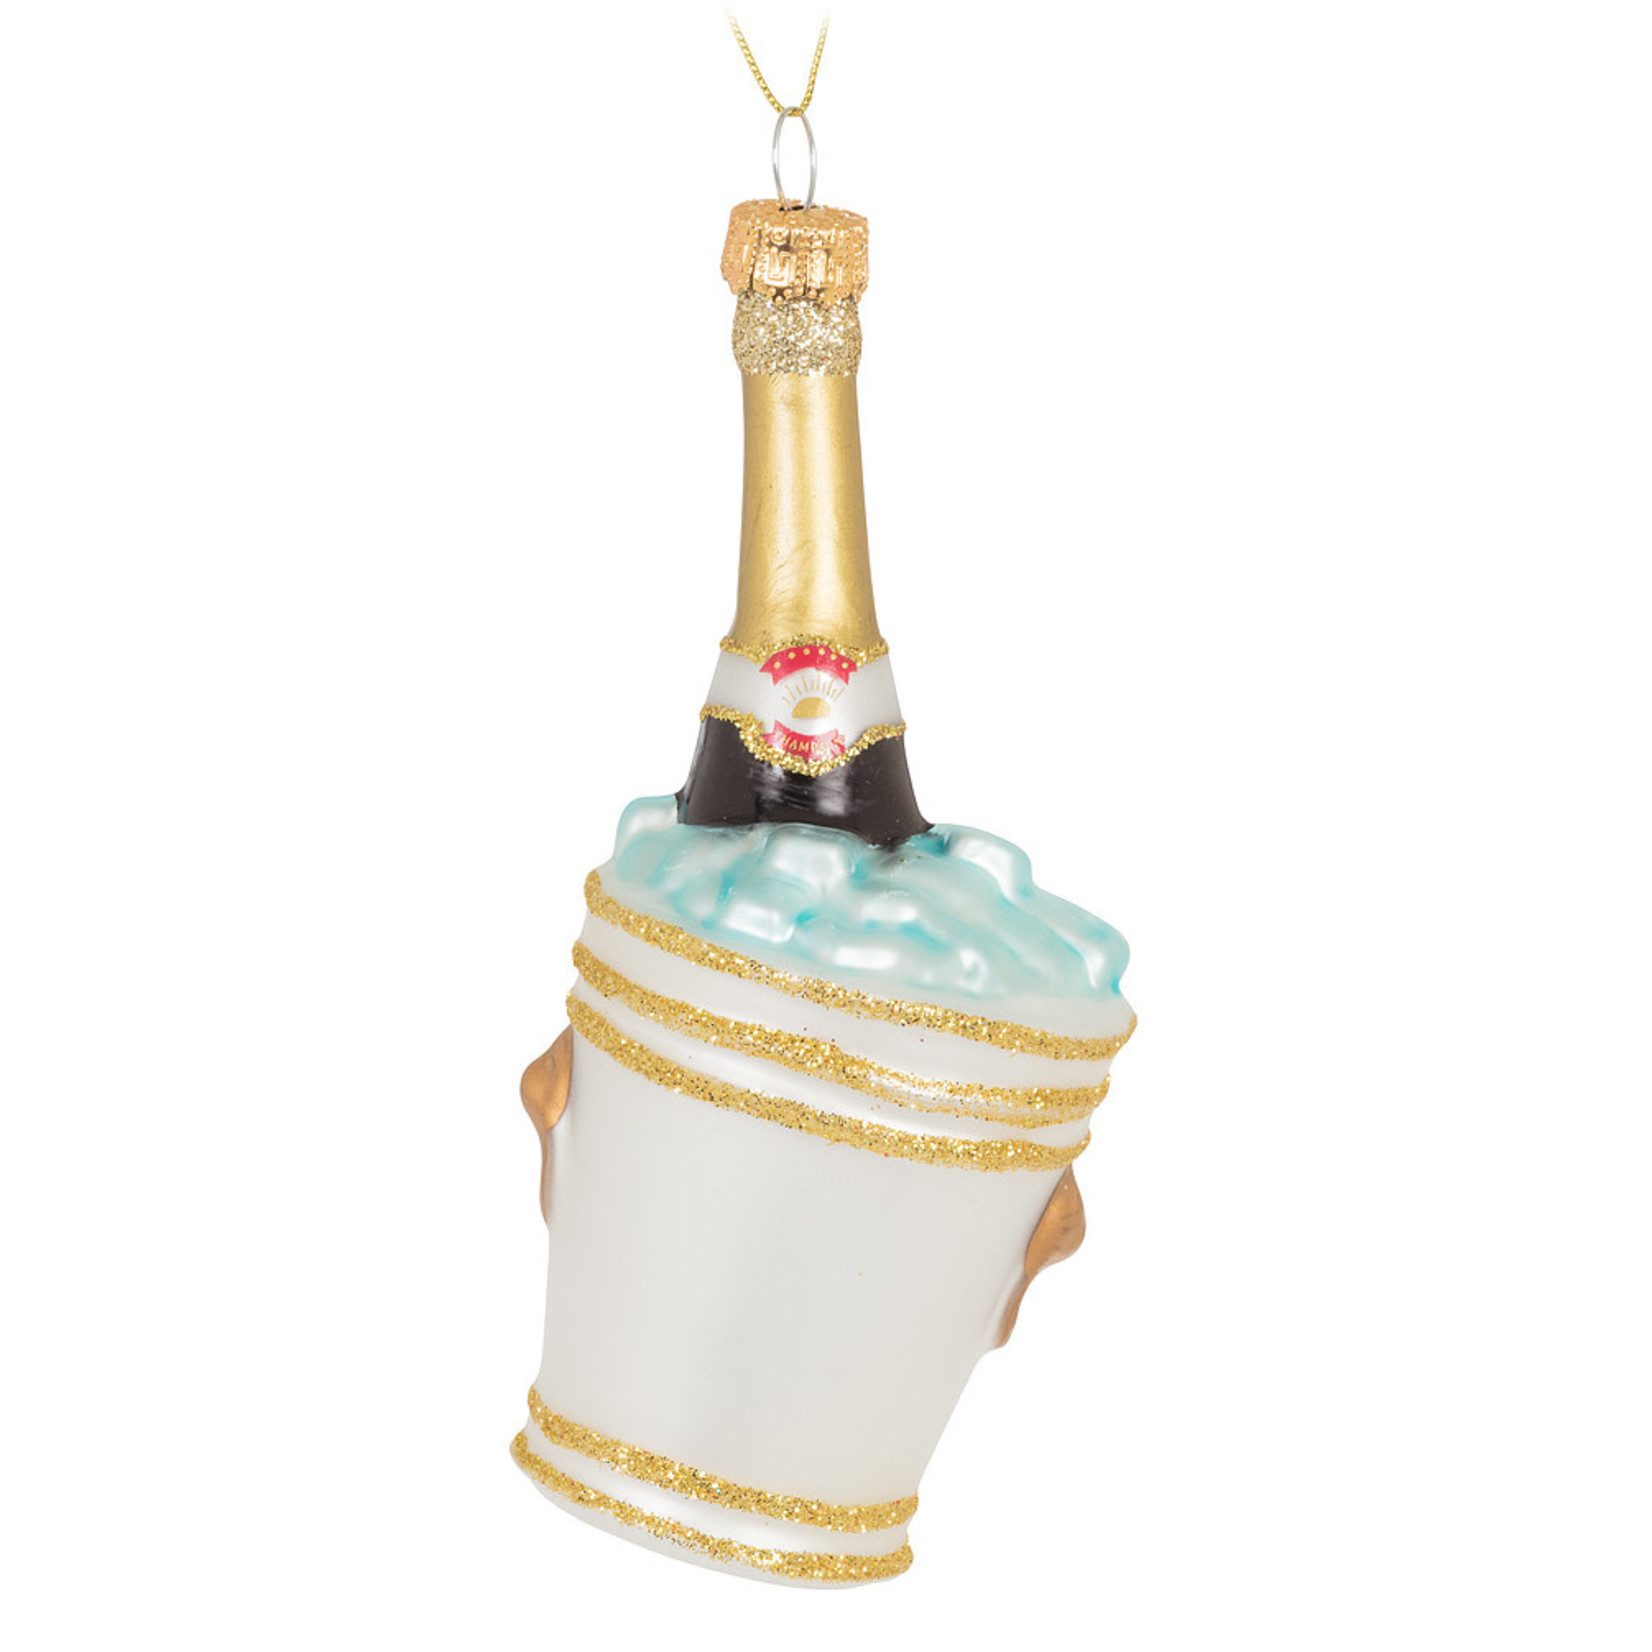 Champagne in Bucket Ornament -5"h